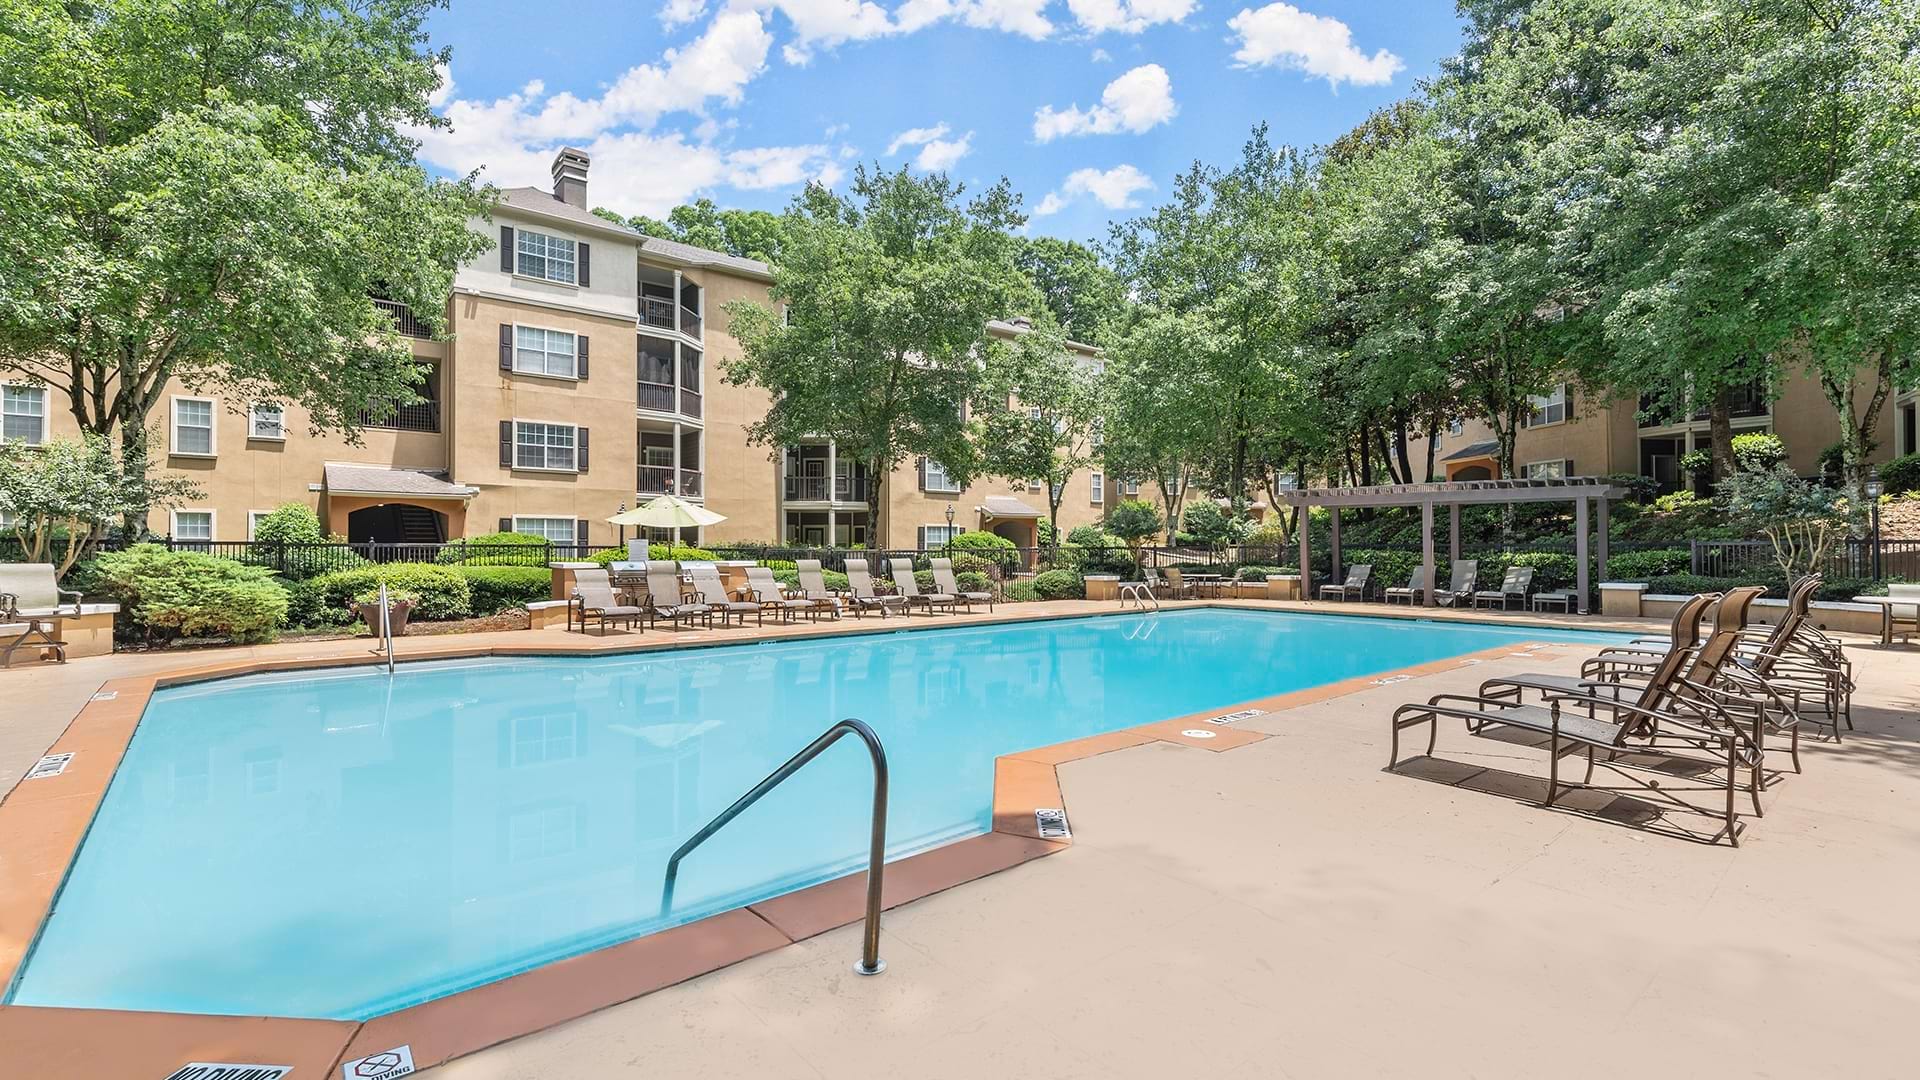 Saltwater Pool and Sun Deck at Our Glenridge Drive Apartments